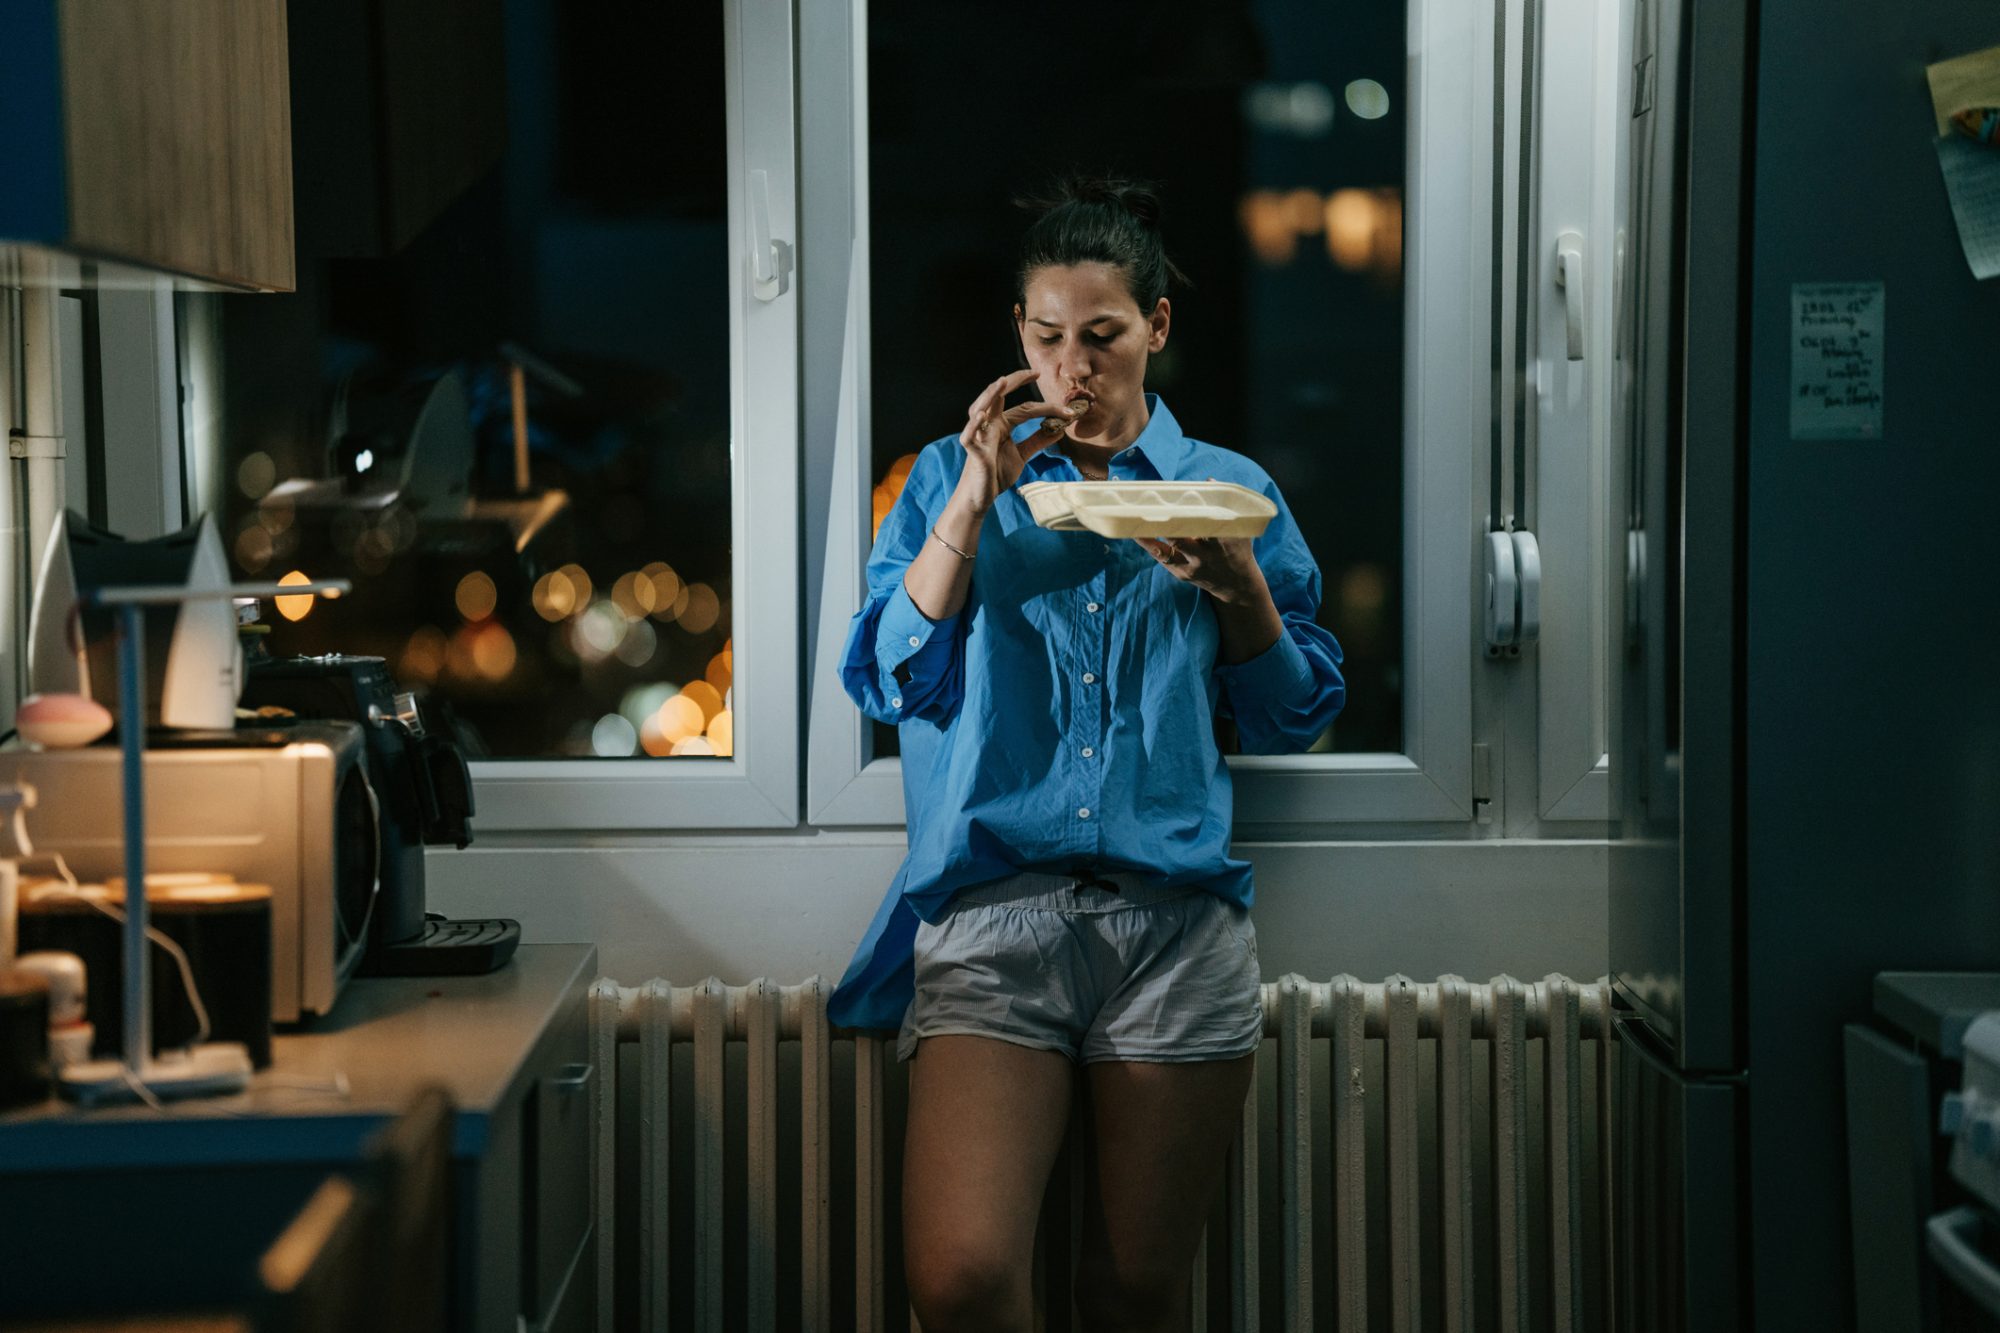 Woman standing in kitchen late at night, she is eating take out food alone.